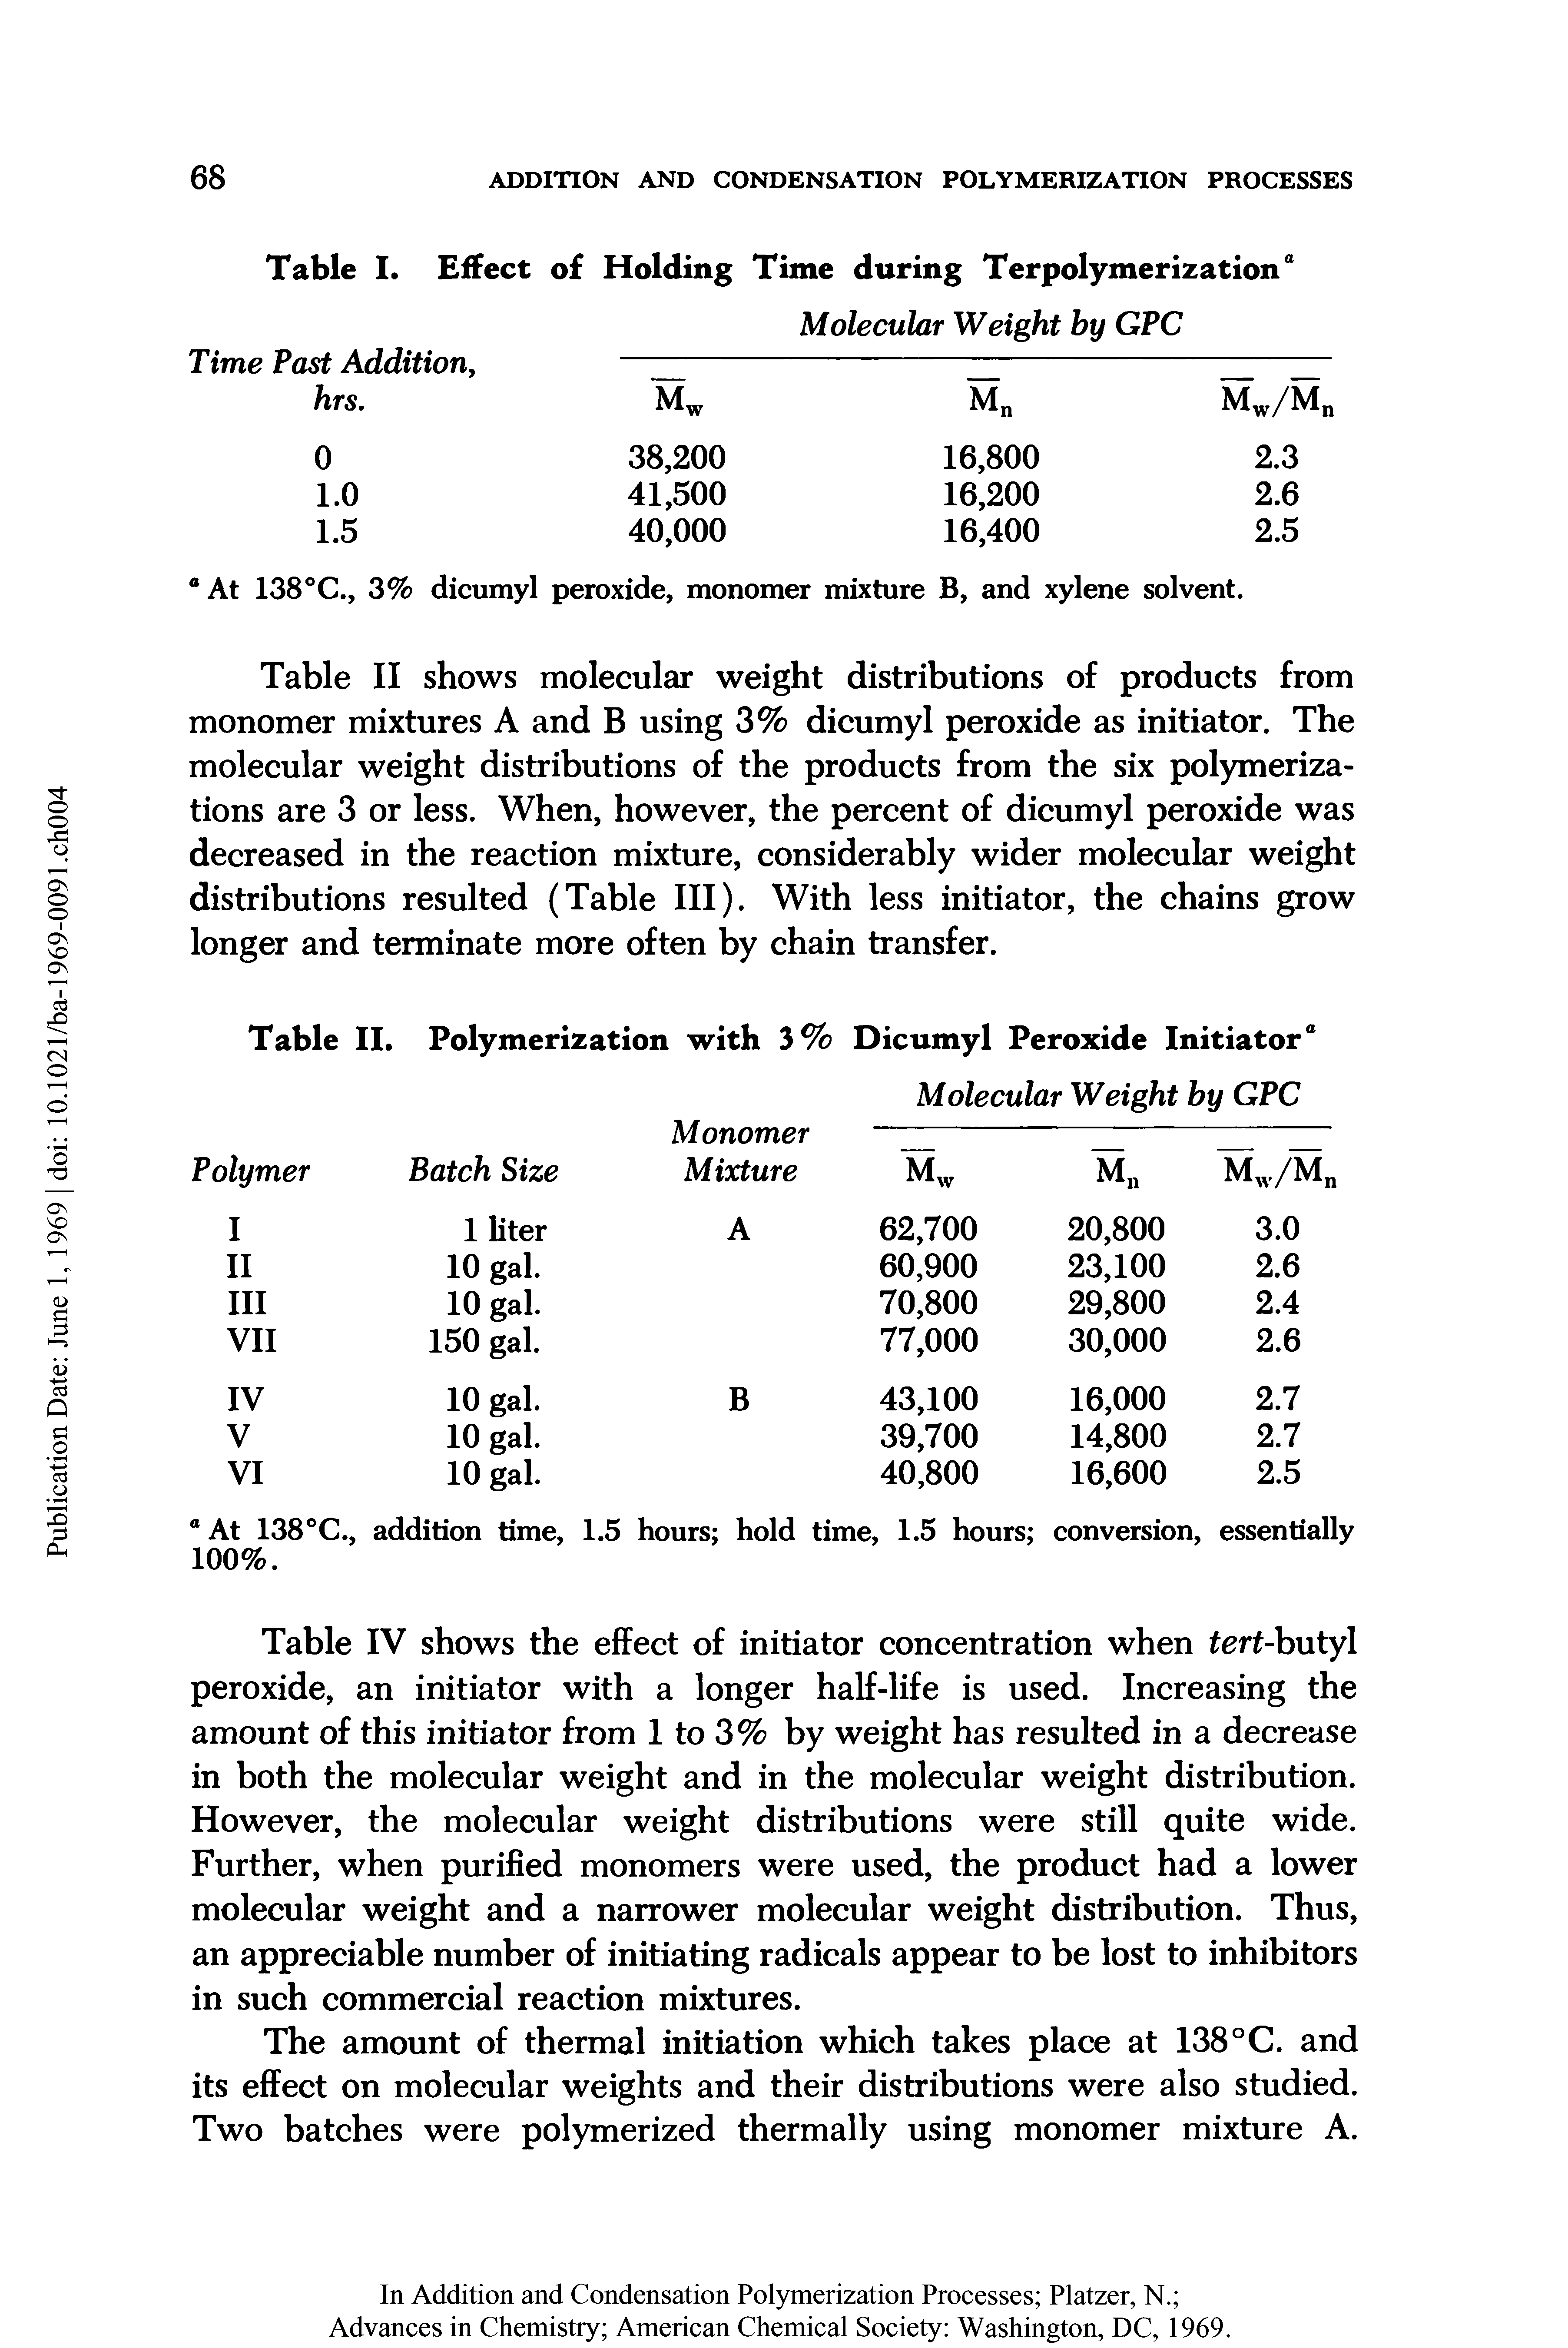 Table II shows molecular weight distributions of products from monomer mixtures A and B using 3% dicumyl peroxide as initiator. The molecular weight distributions of the products from the six polymerizations are 3 or less. When, however, the percent of dicumyl peroxide was decreased in the reaction mixture, considerably wider molecular weight distributions resulted (Table III). With less initiator, the chains grow longer and terminate more often by chain transfer.